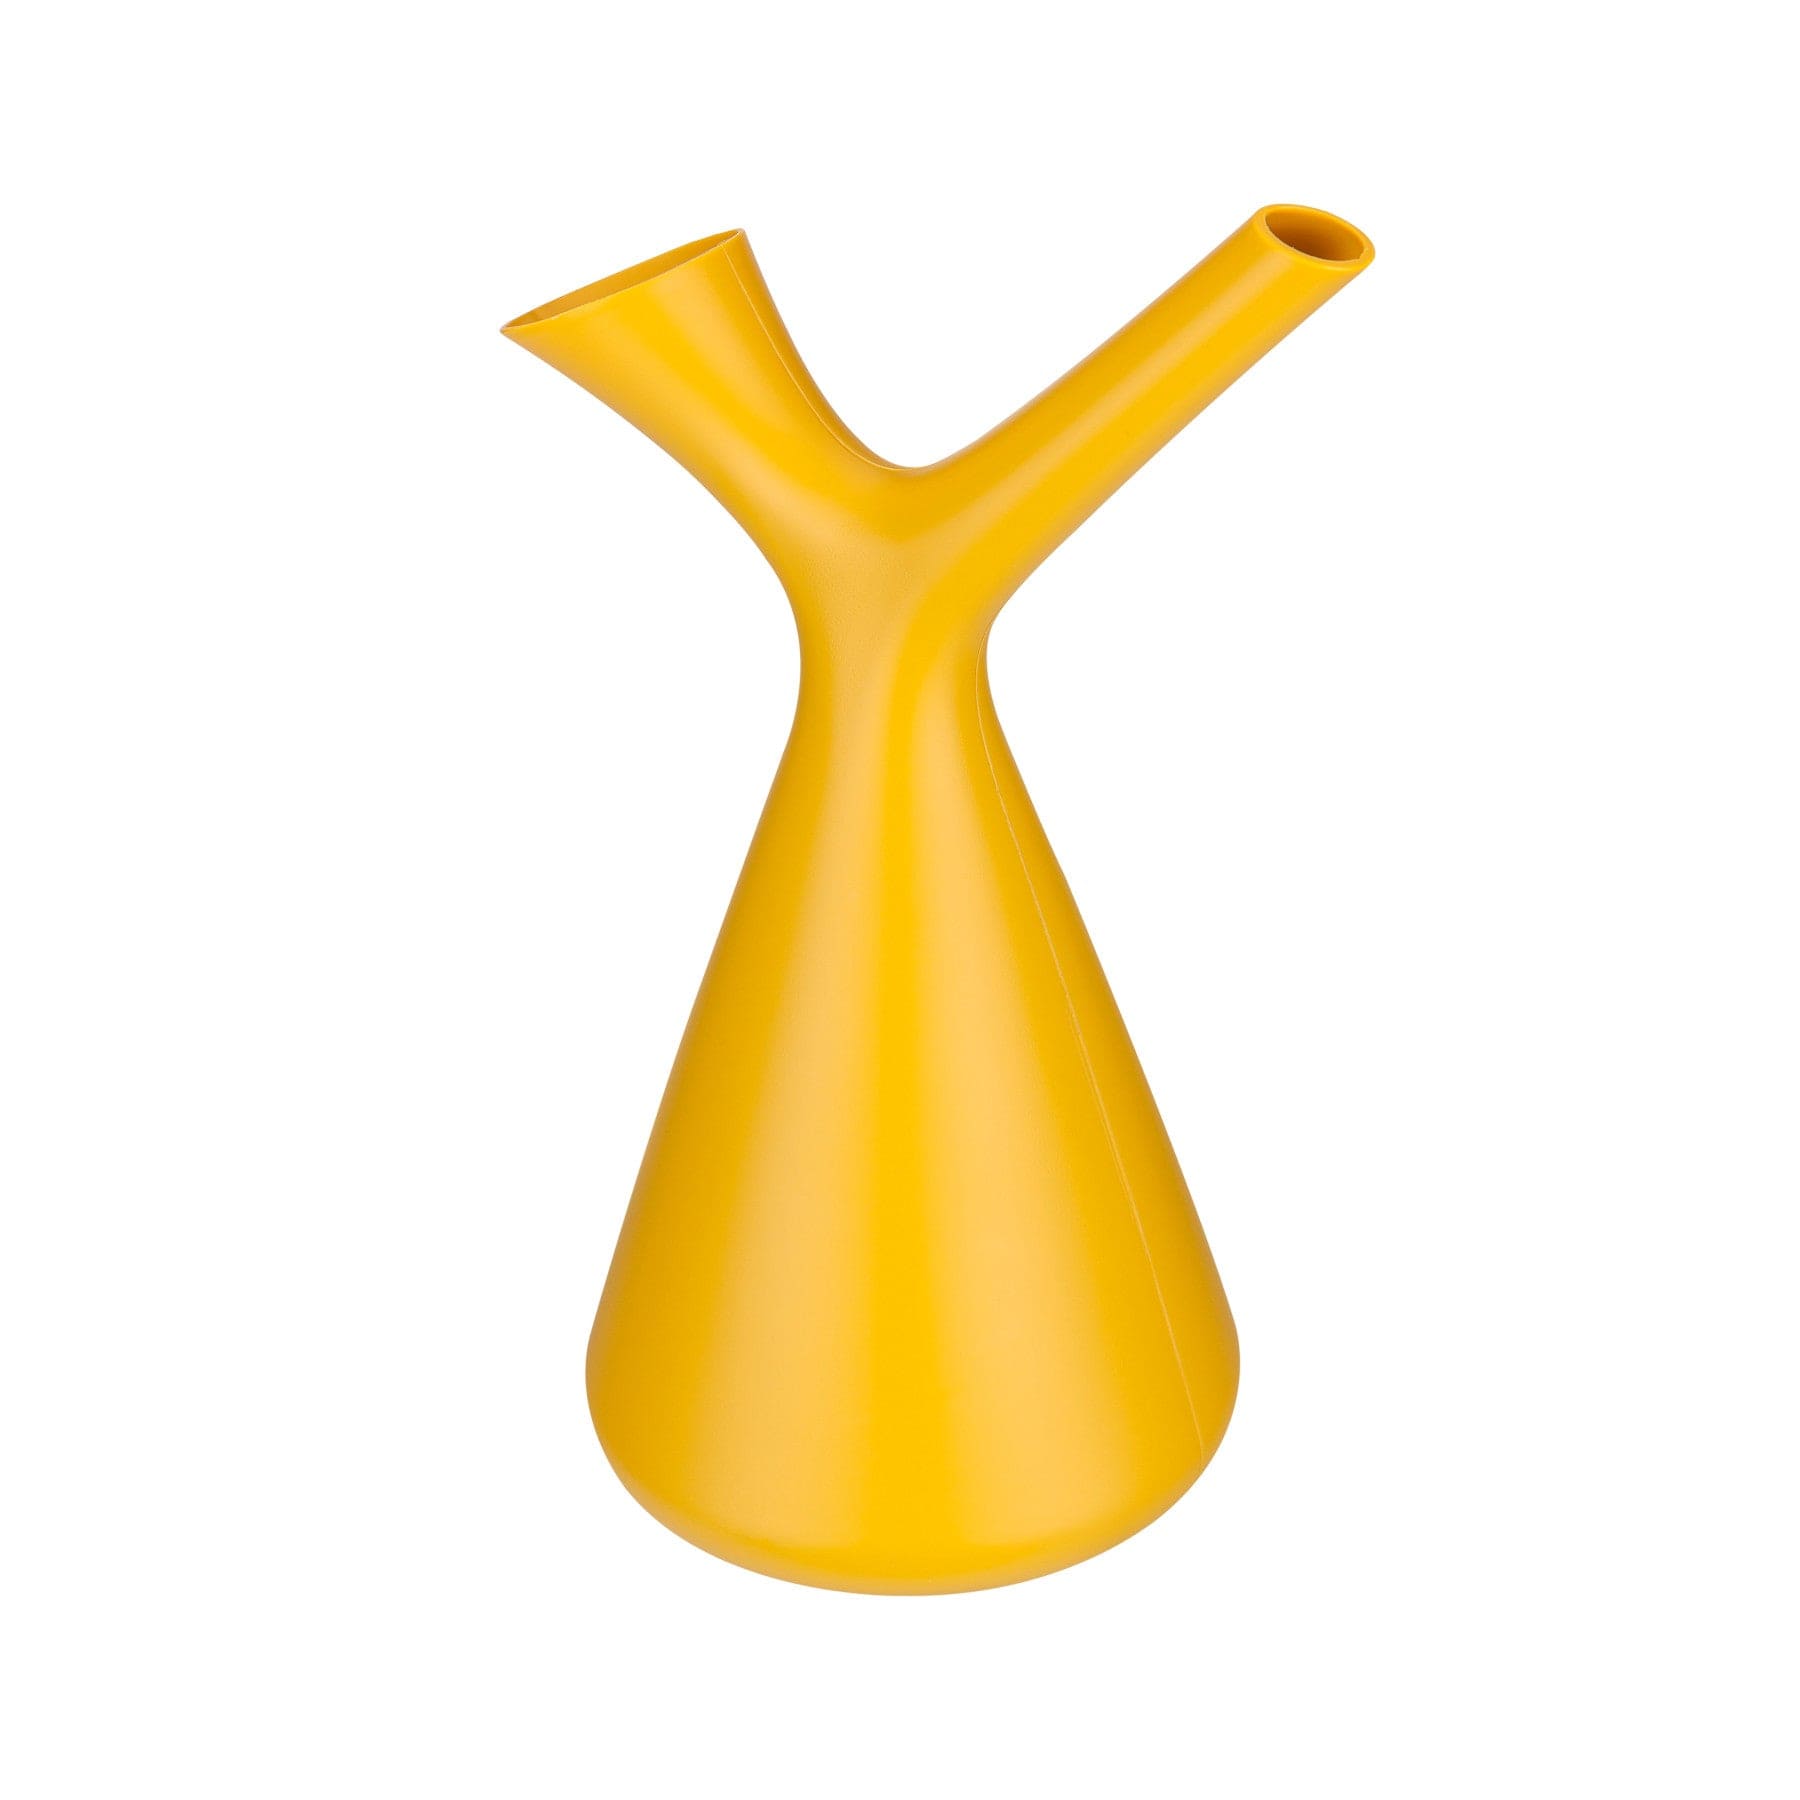 Bright yellow modern vase with unique Y-shaped design on white background.